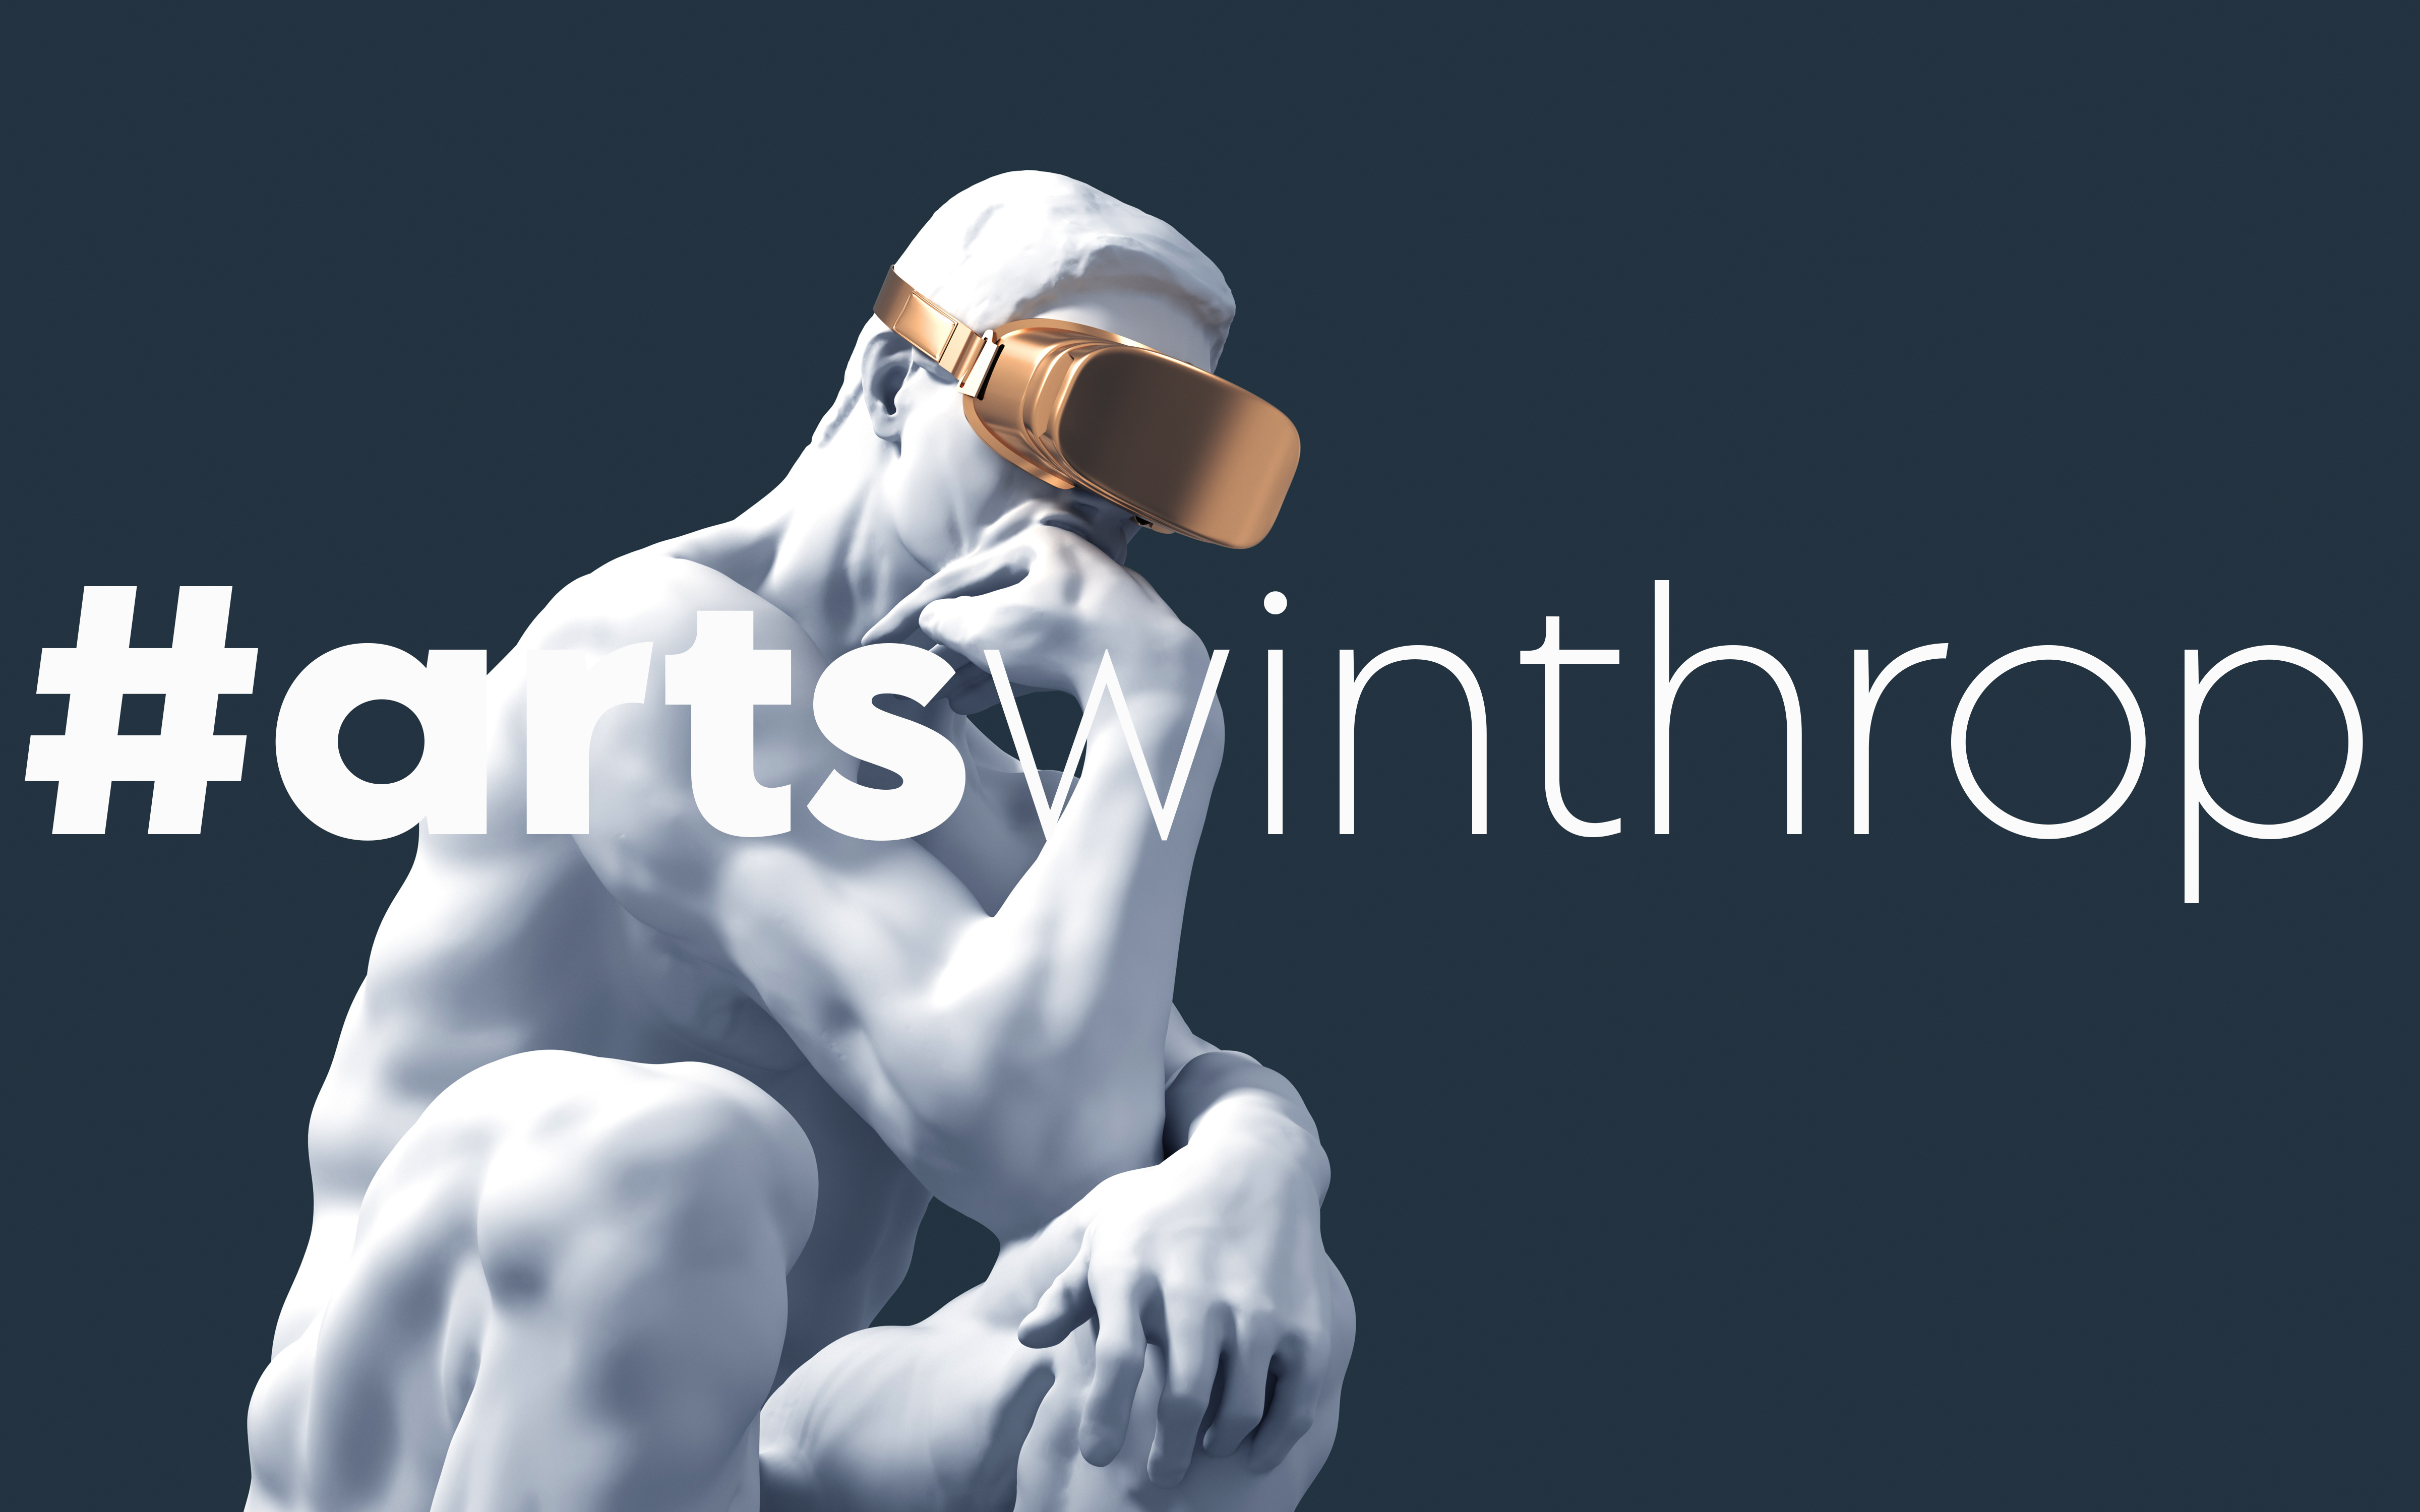 marble sculpture wearing VR headset